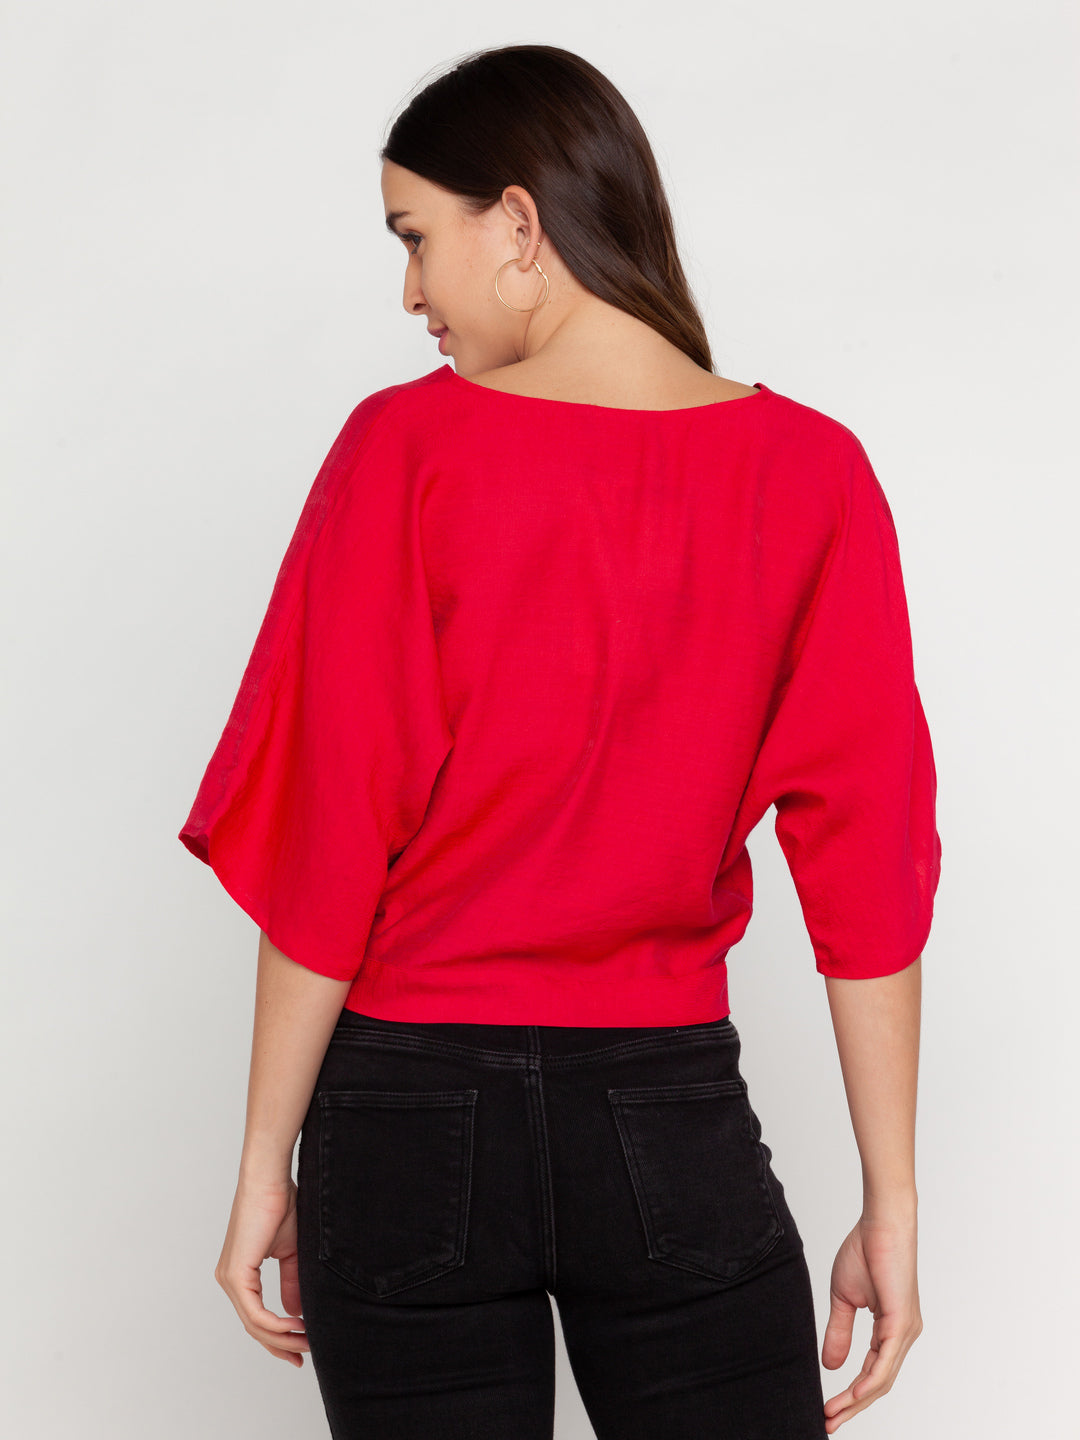 Red Solid Top For Women